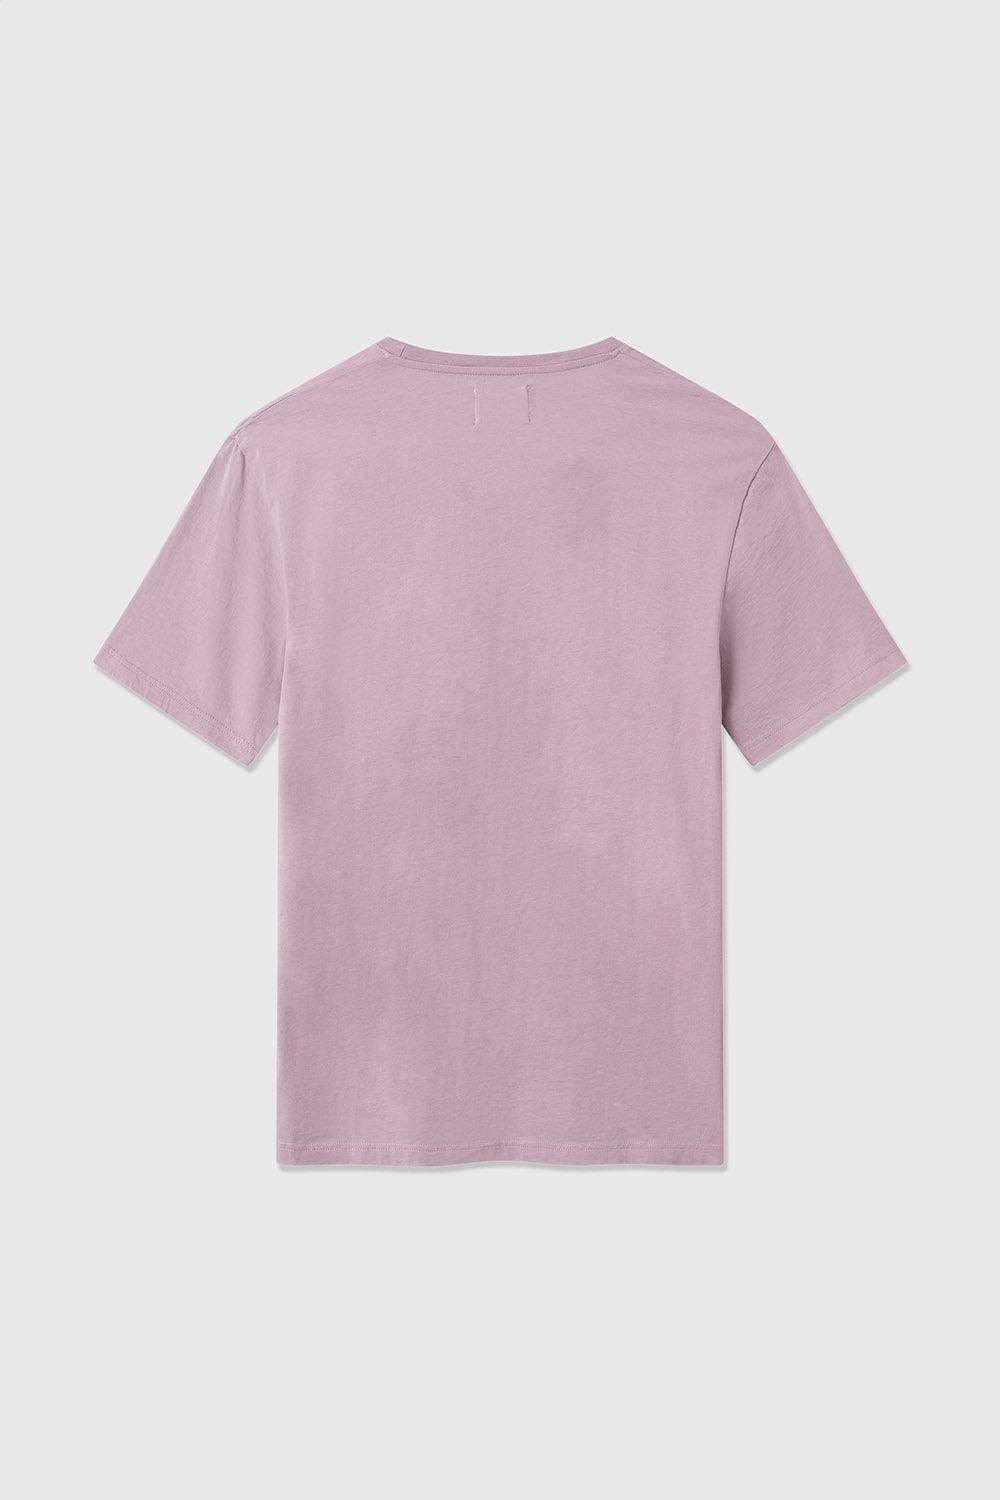 Camiseta Double A by Wood Wood Ace Pink - ECRU